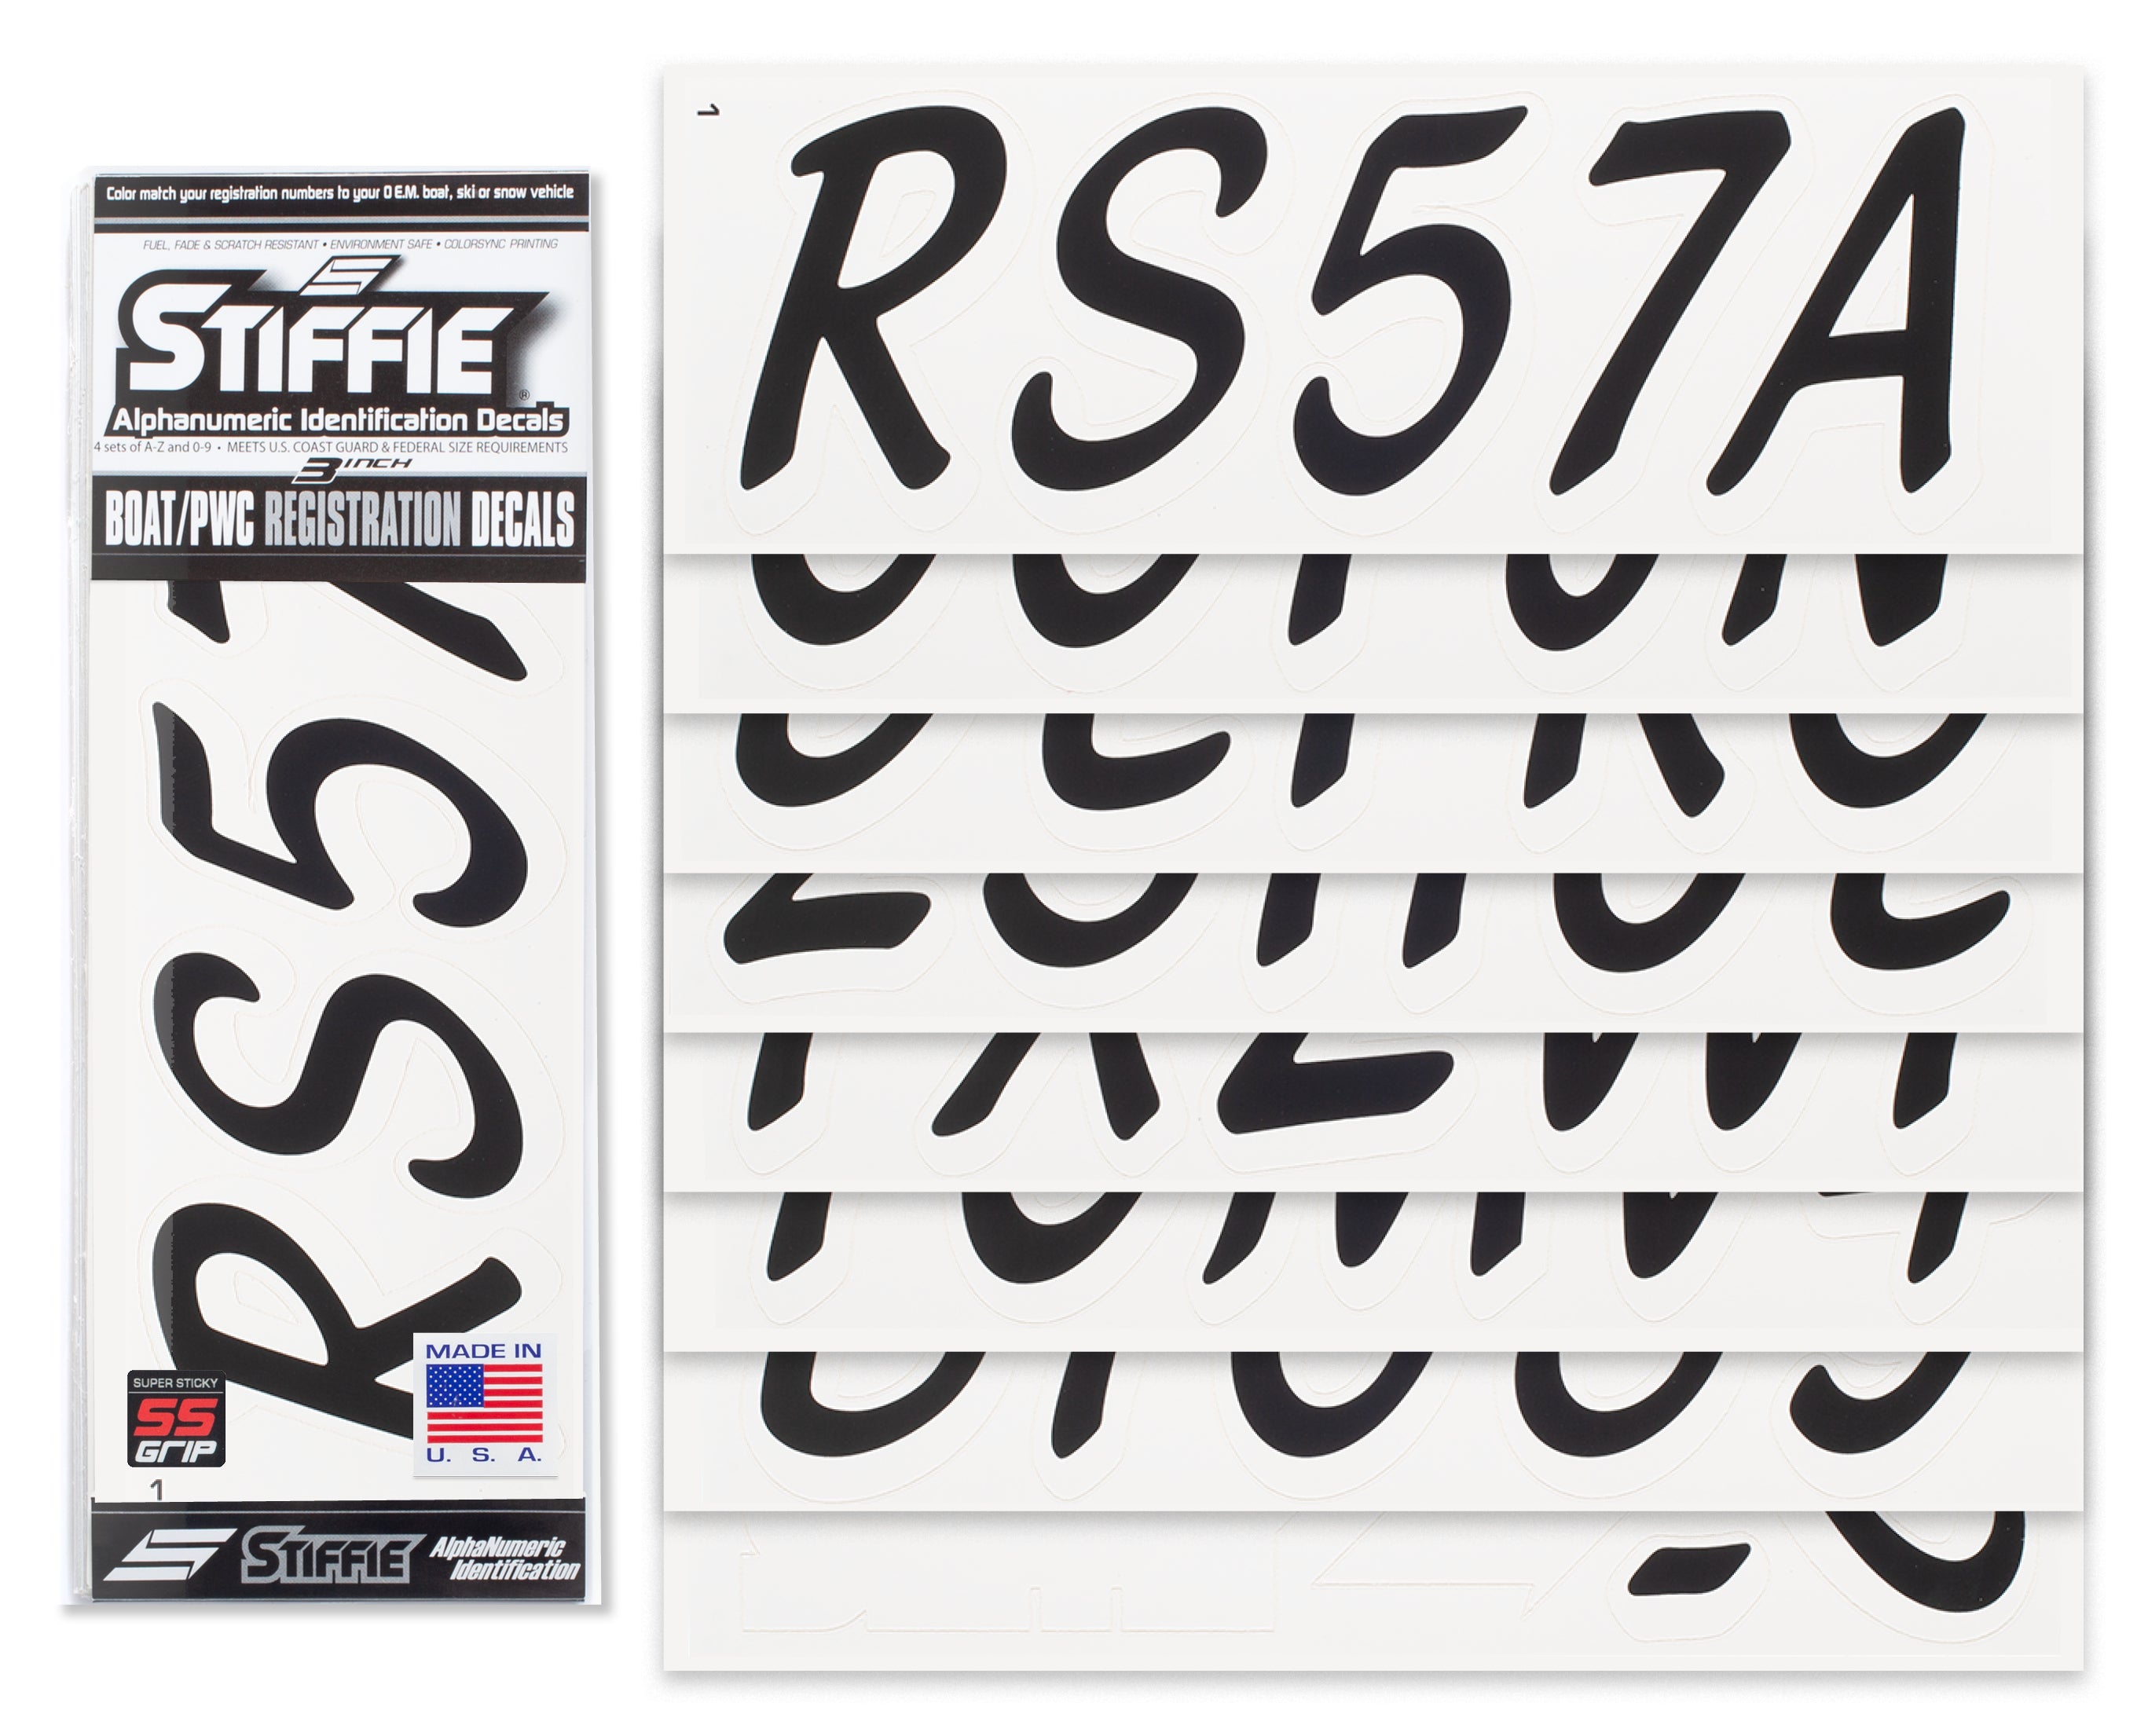 STIFFIE Whipline Solid Black/White Super Sticky 3" Alpha-Numeric Registration Identification Numbers Stickers Decals for Boats & Personal Watercraft